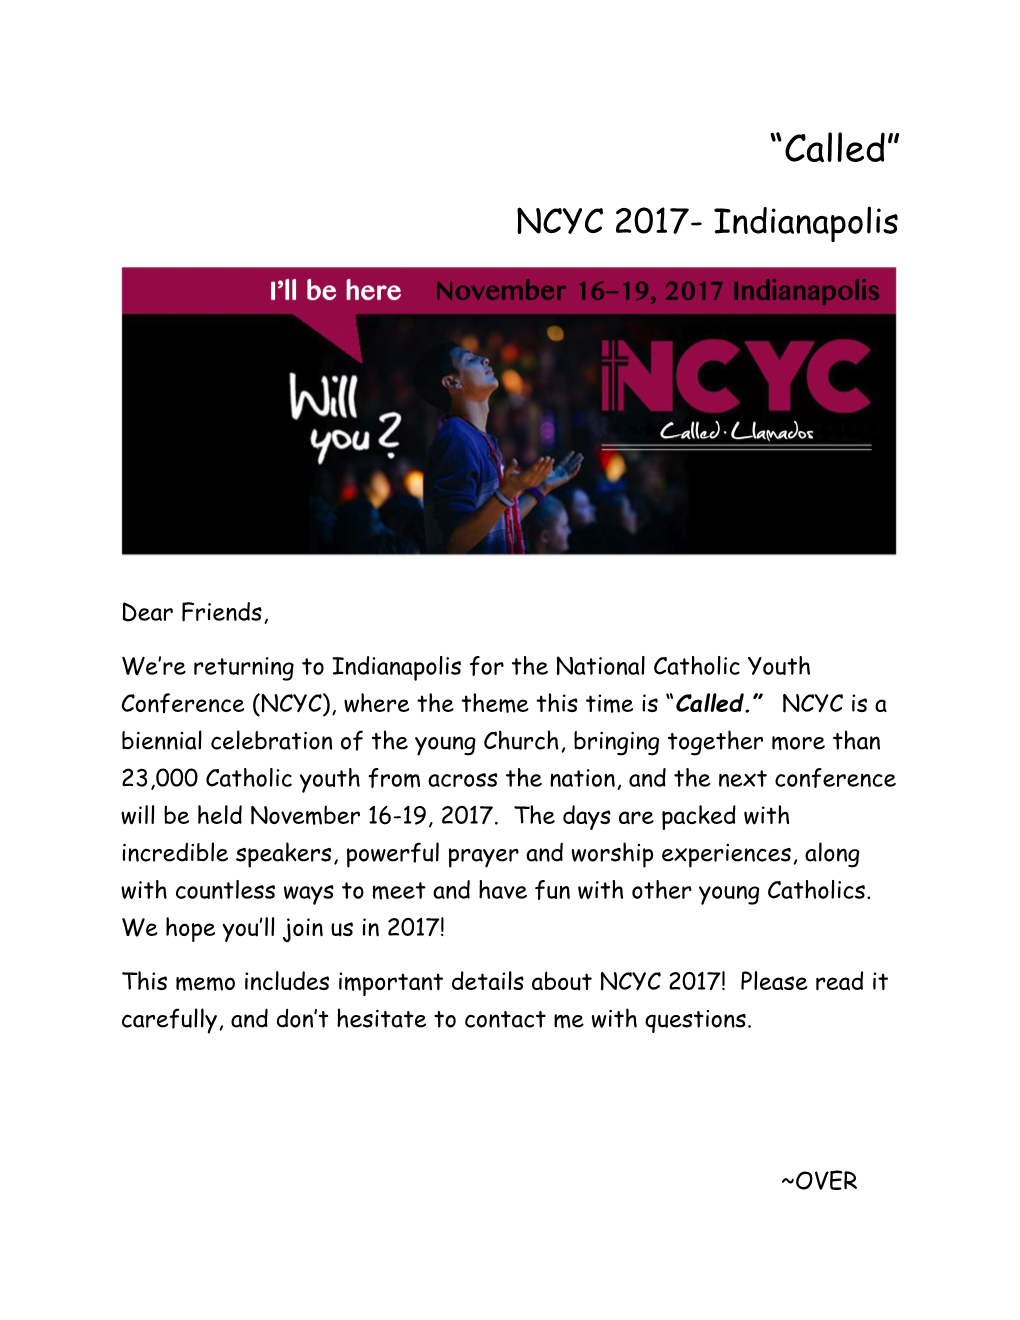 What Is NCYC and Who Is It For?